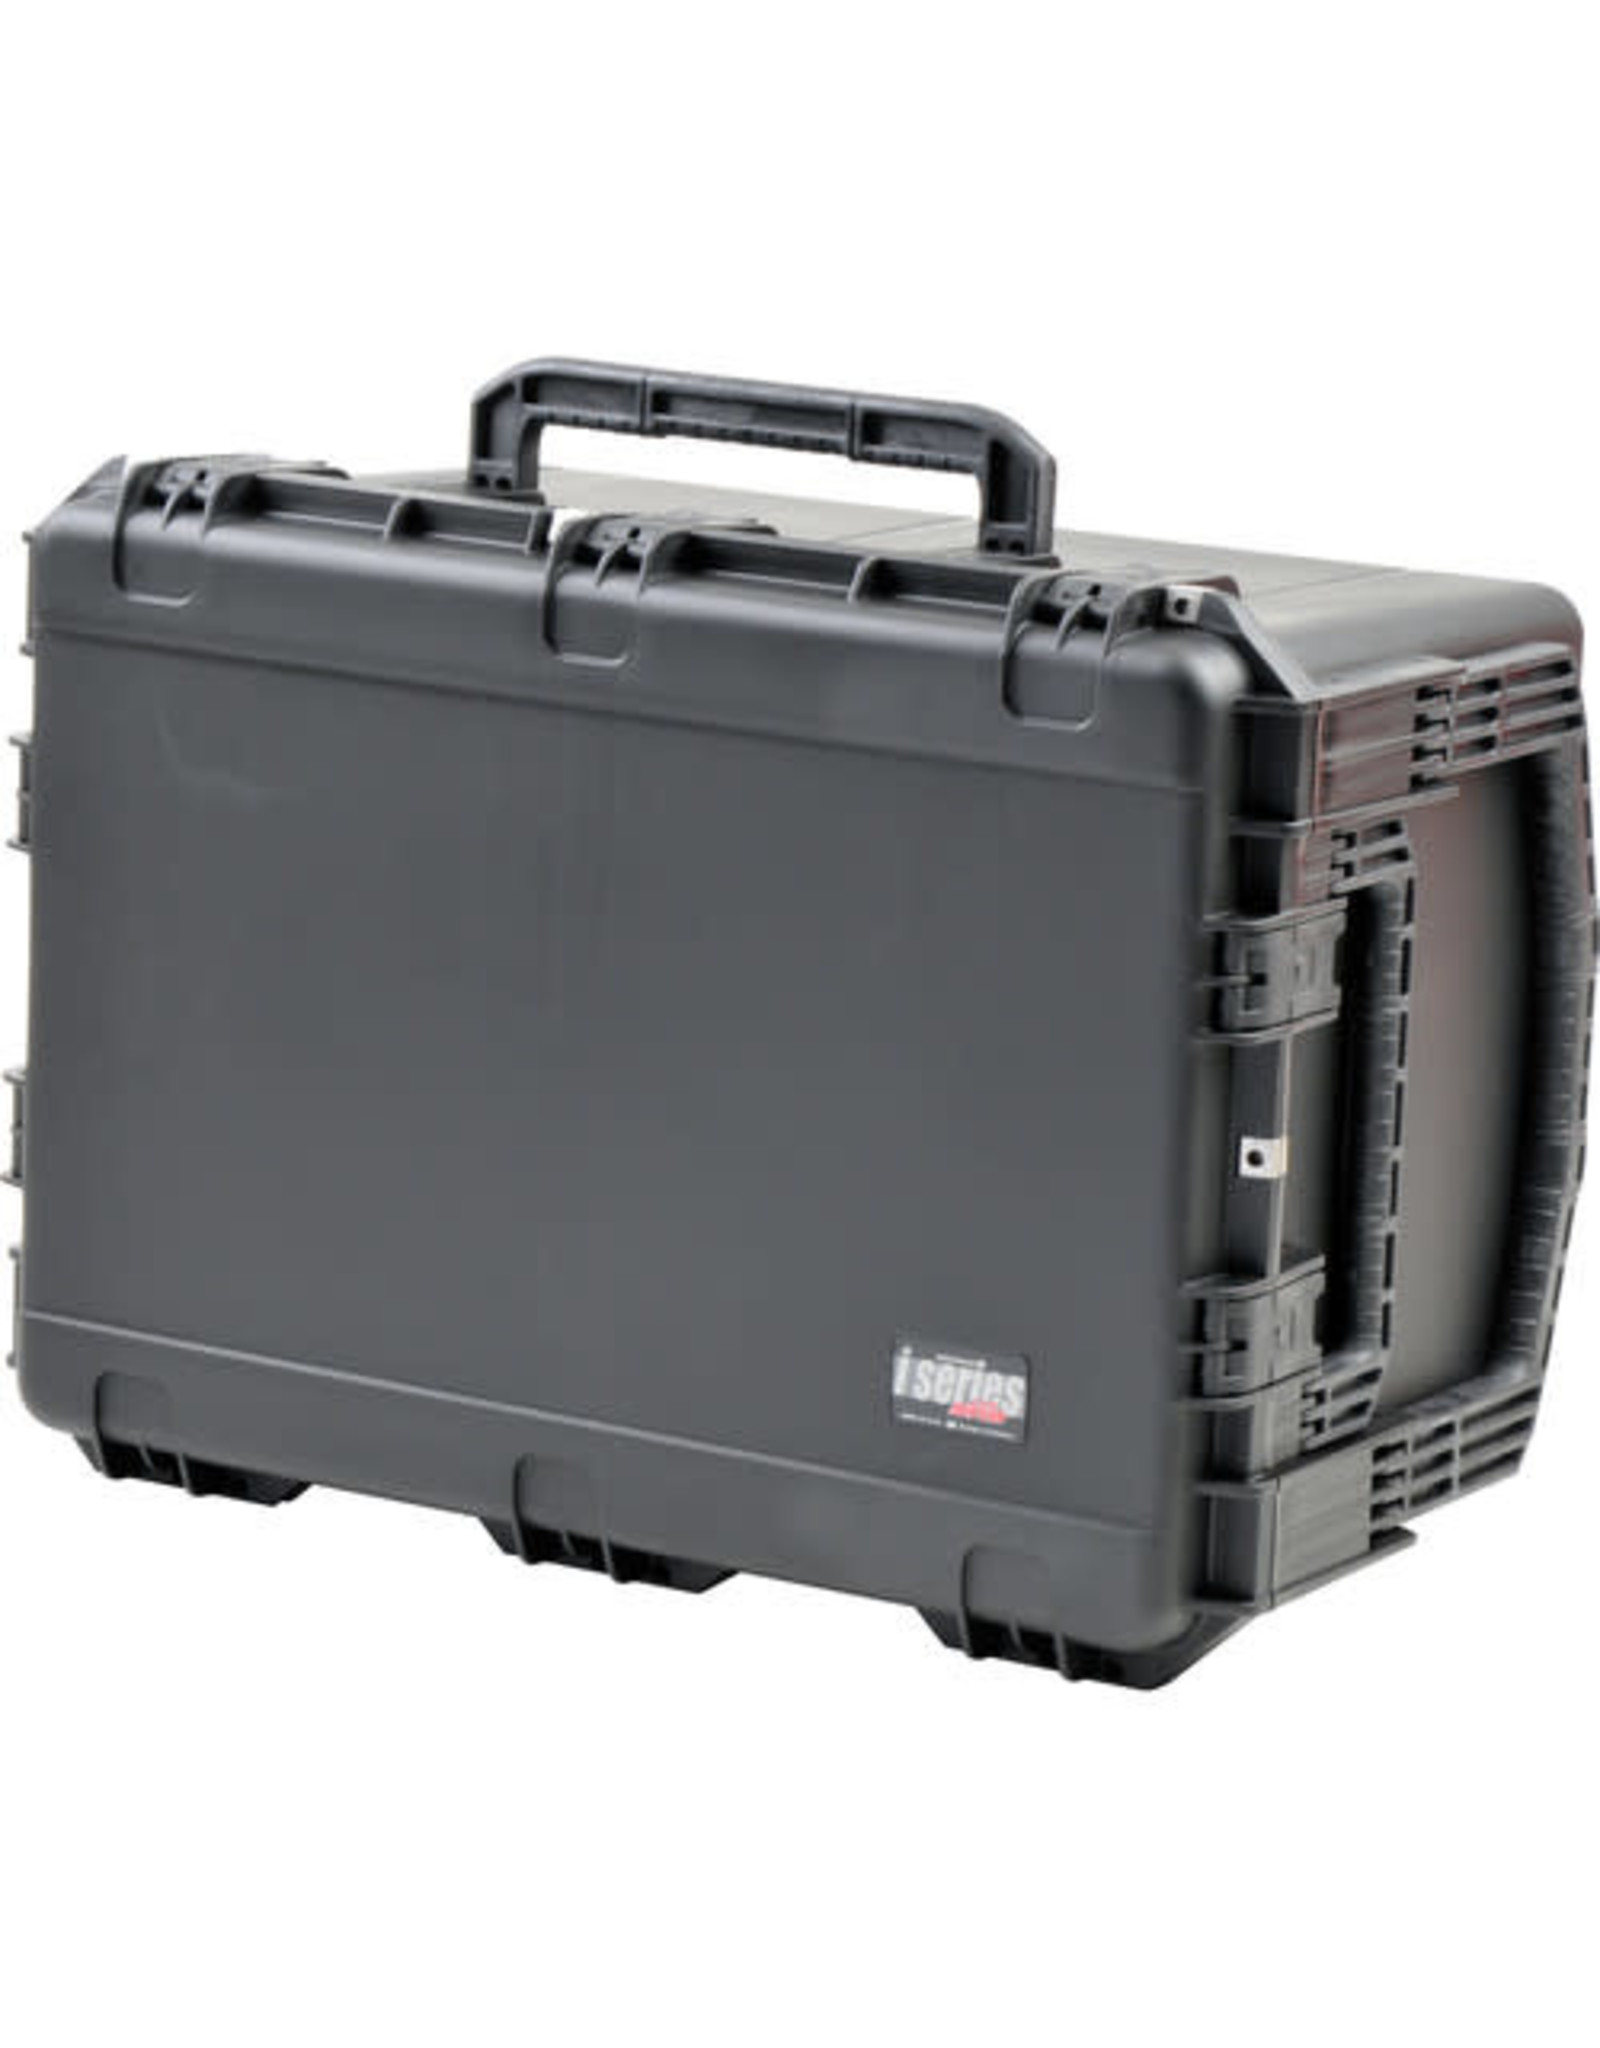 SKB Cases SKB iSeries 3021-18BC Waterproof Case (with cubed foam) with wheels - 3i-3021-18BC   (FITS PERFECTLY THE MEADE 8" LX90!)